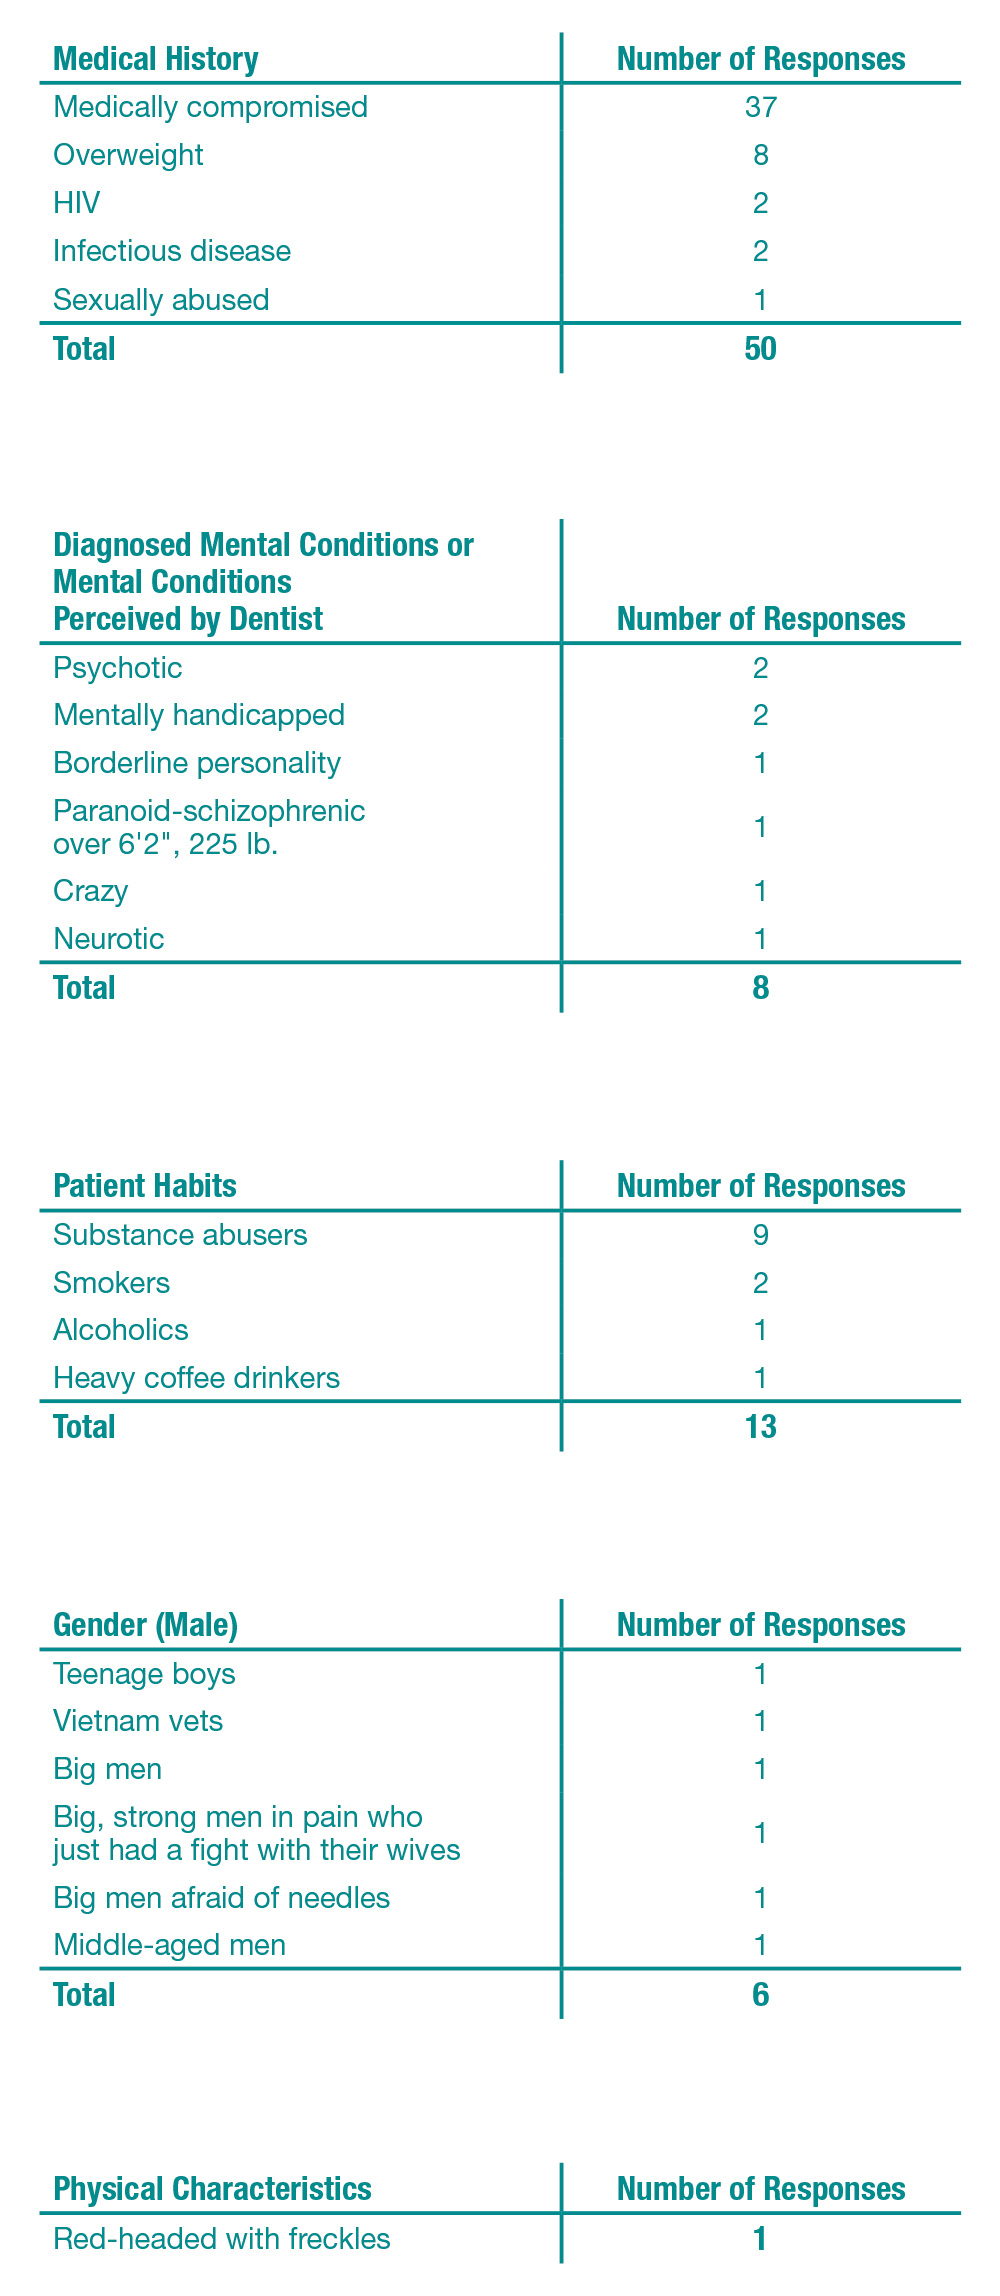 Table 1 Medical History, Mental Conditions, Patient Habits, Gender and Physcal Characteristics